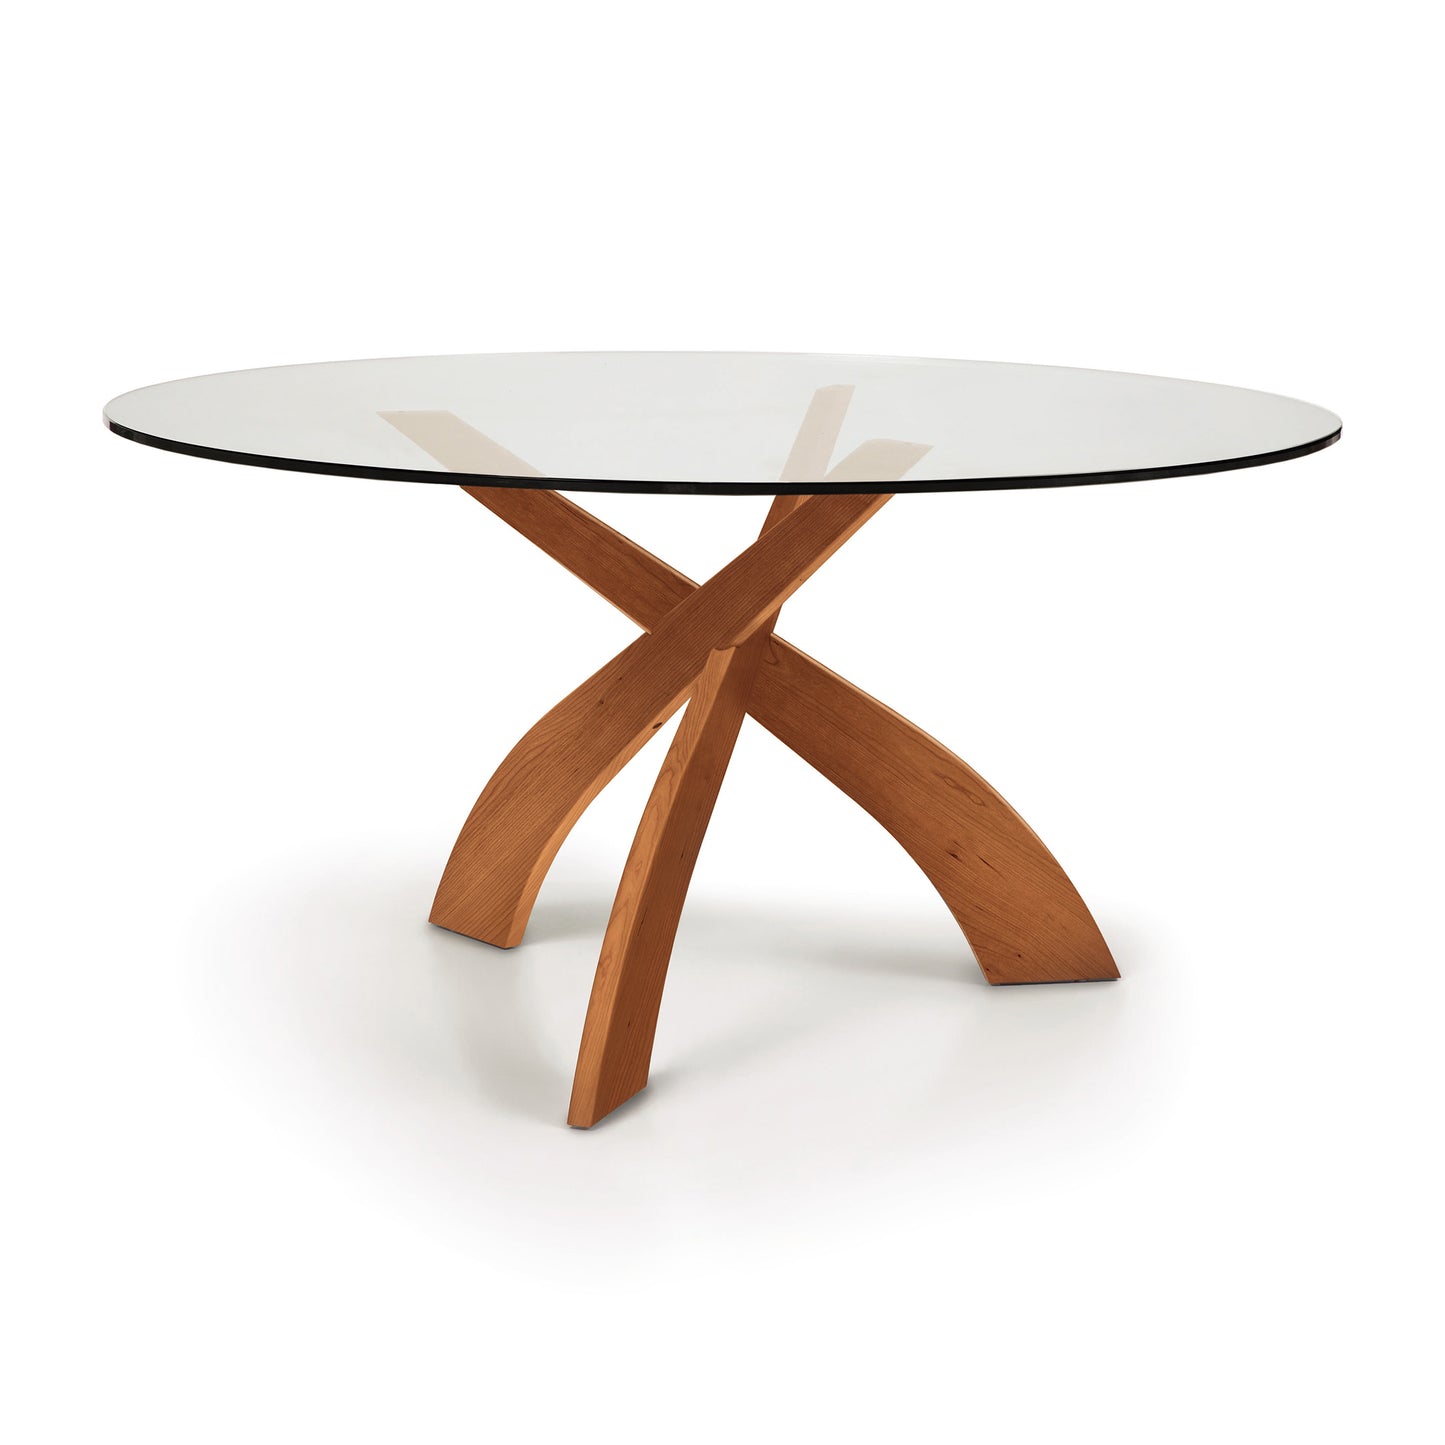 A modern Entwine Round Glass Top Dining Table with a tempered glass top and a sustainably sourced cherry wood x-shaped base by Copeland Furniture.